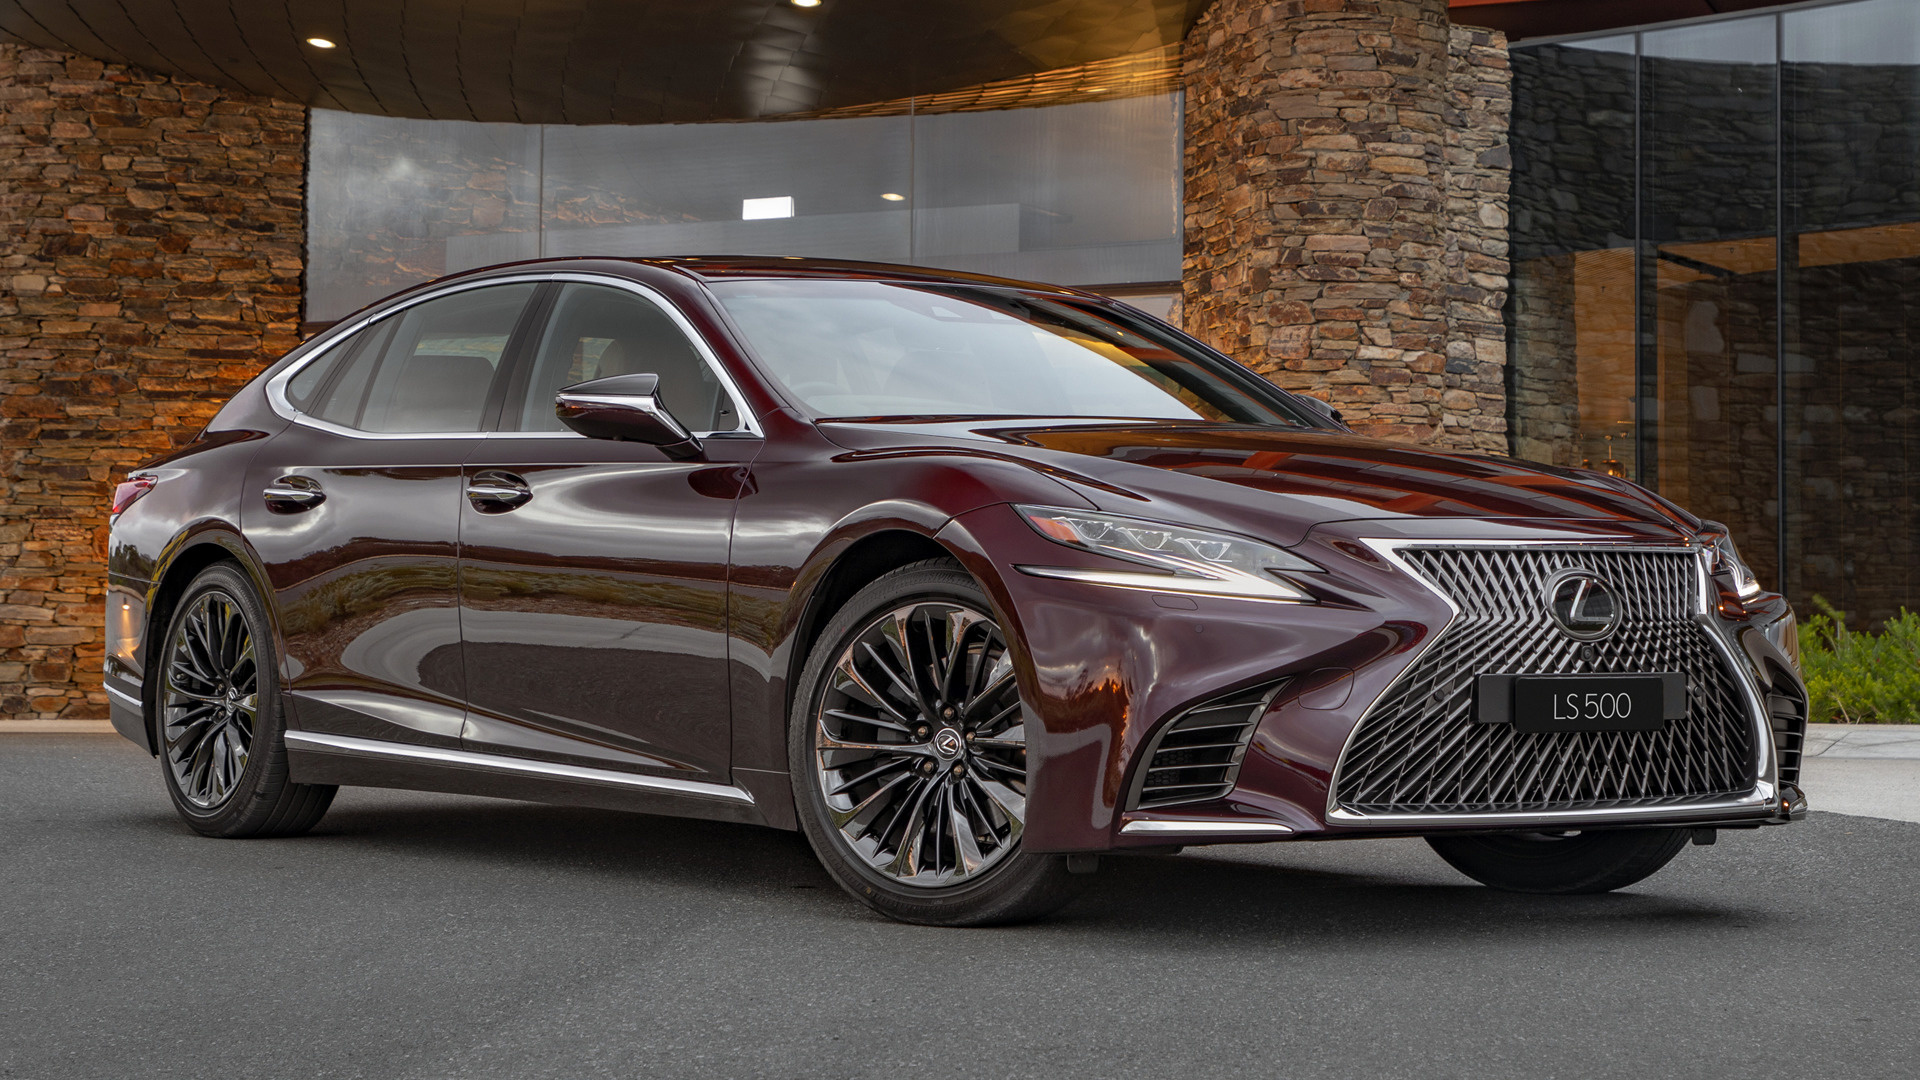 2019 Lexus LS Inspiration Series (AU) Wallpapers and HD Images Car